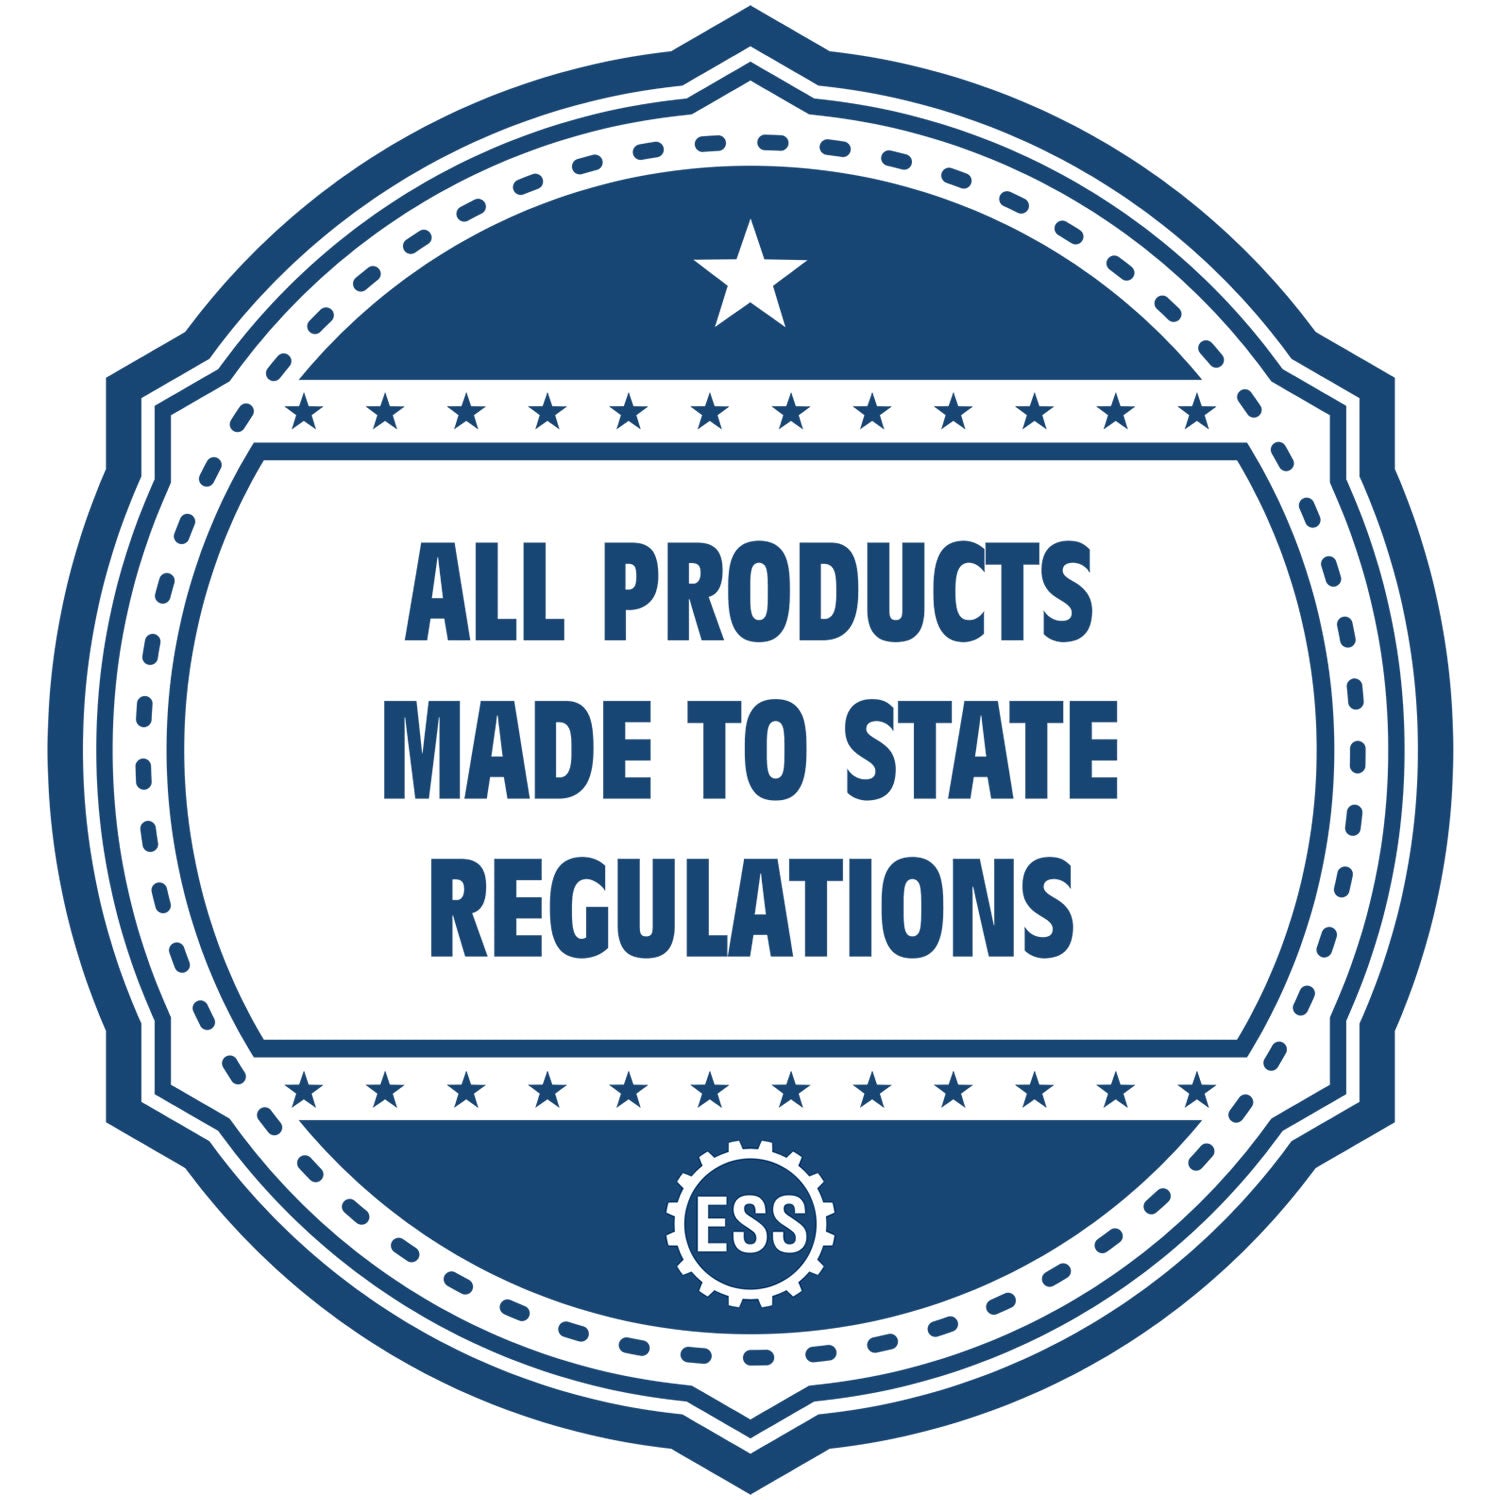 An icon or badge element for the Premium MaxLight Pre-Inked Delaware Landscape Architectural Stamp showing that this product is made in compliance with state regulations.